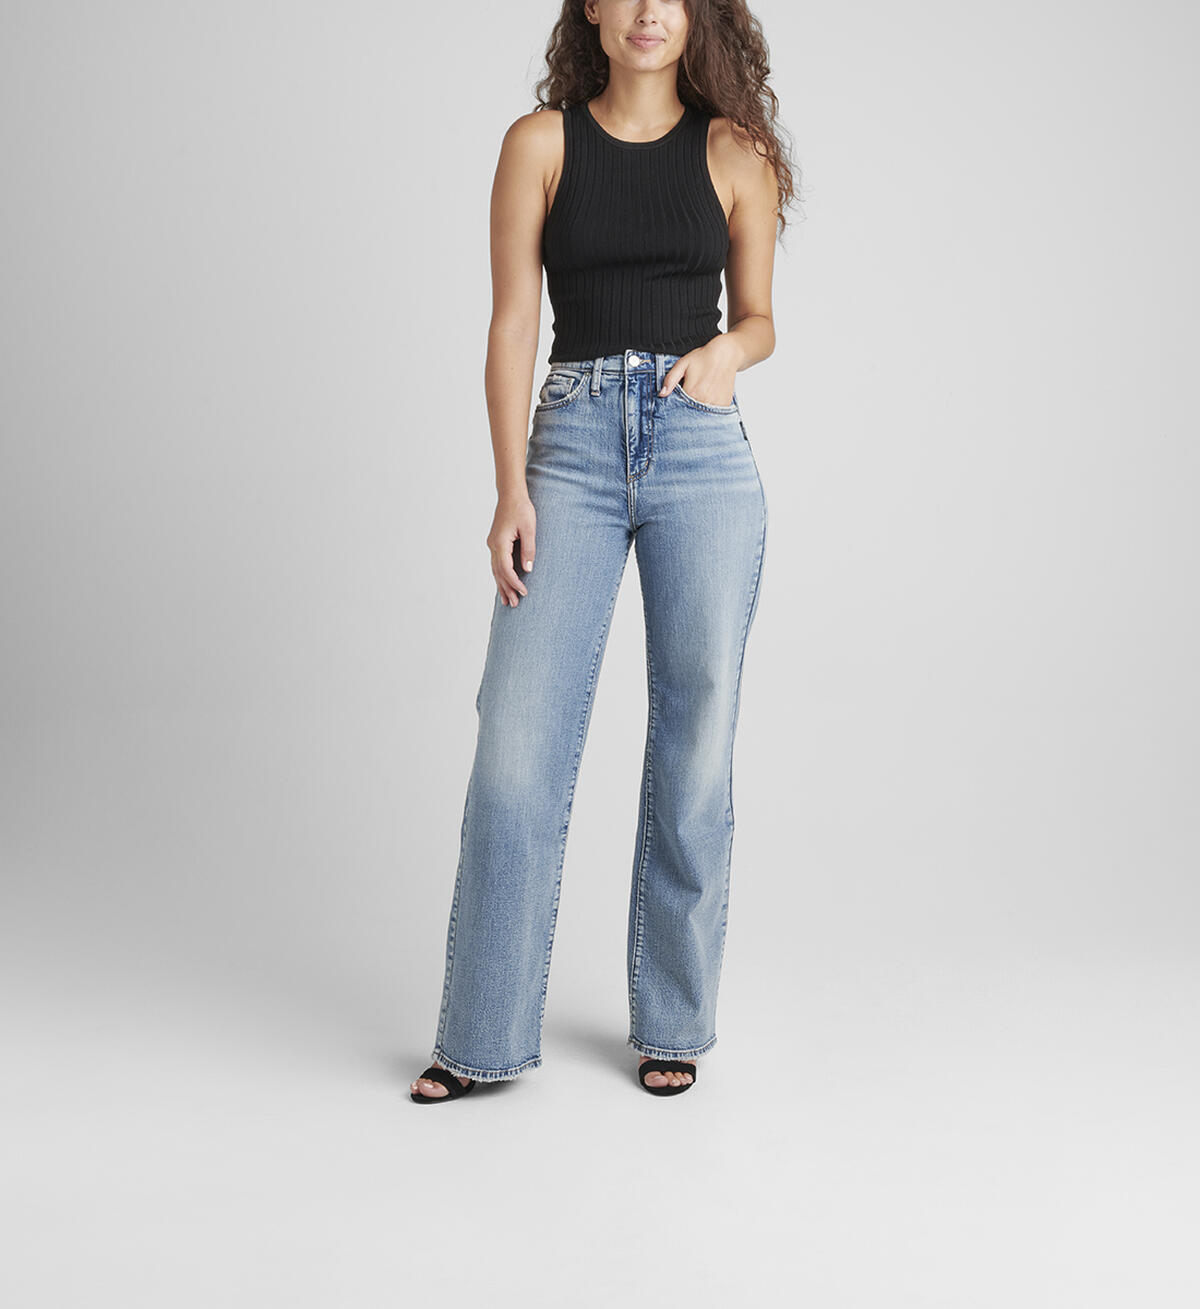 Highly Desirable High Rise Trouser Leg Jeans, , hi-res image number 0